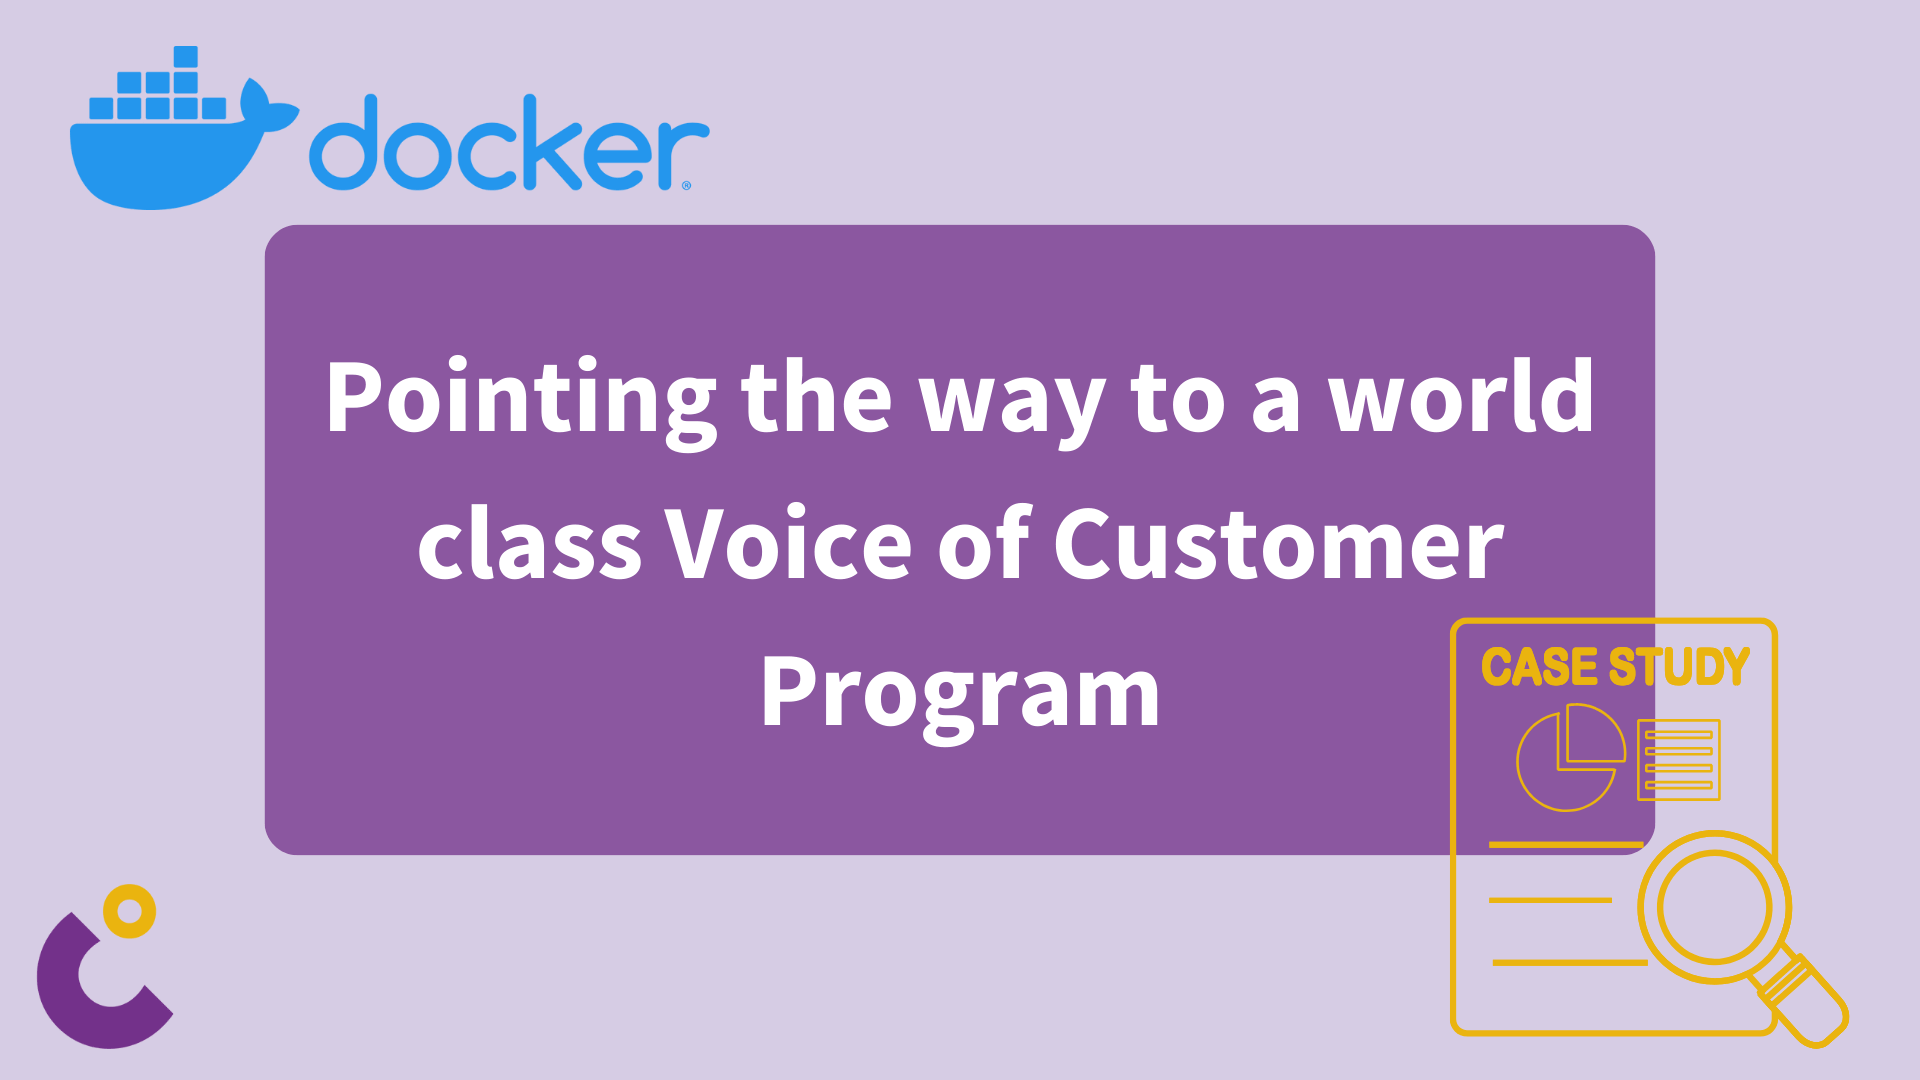 Case Study DOCKER Pointing the way to a world class Voice of Customer Program